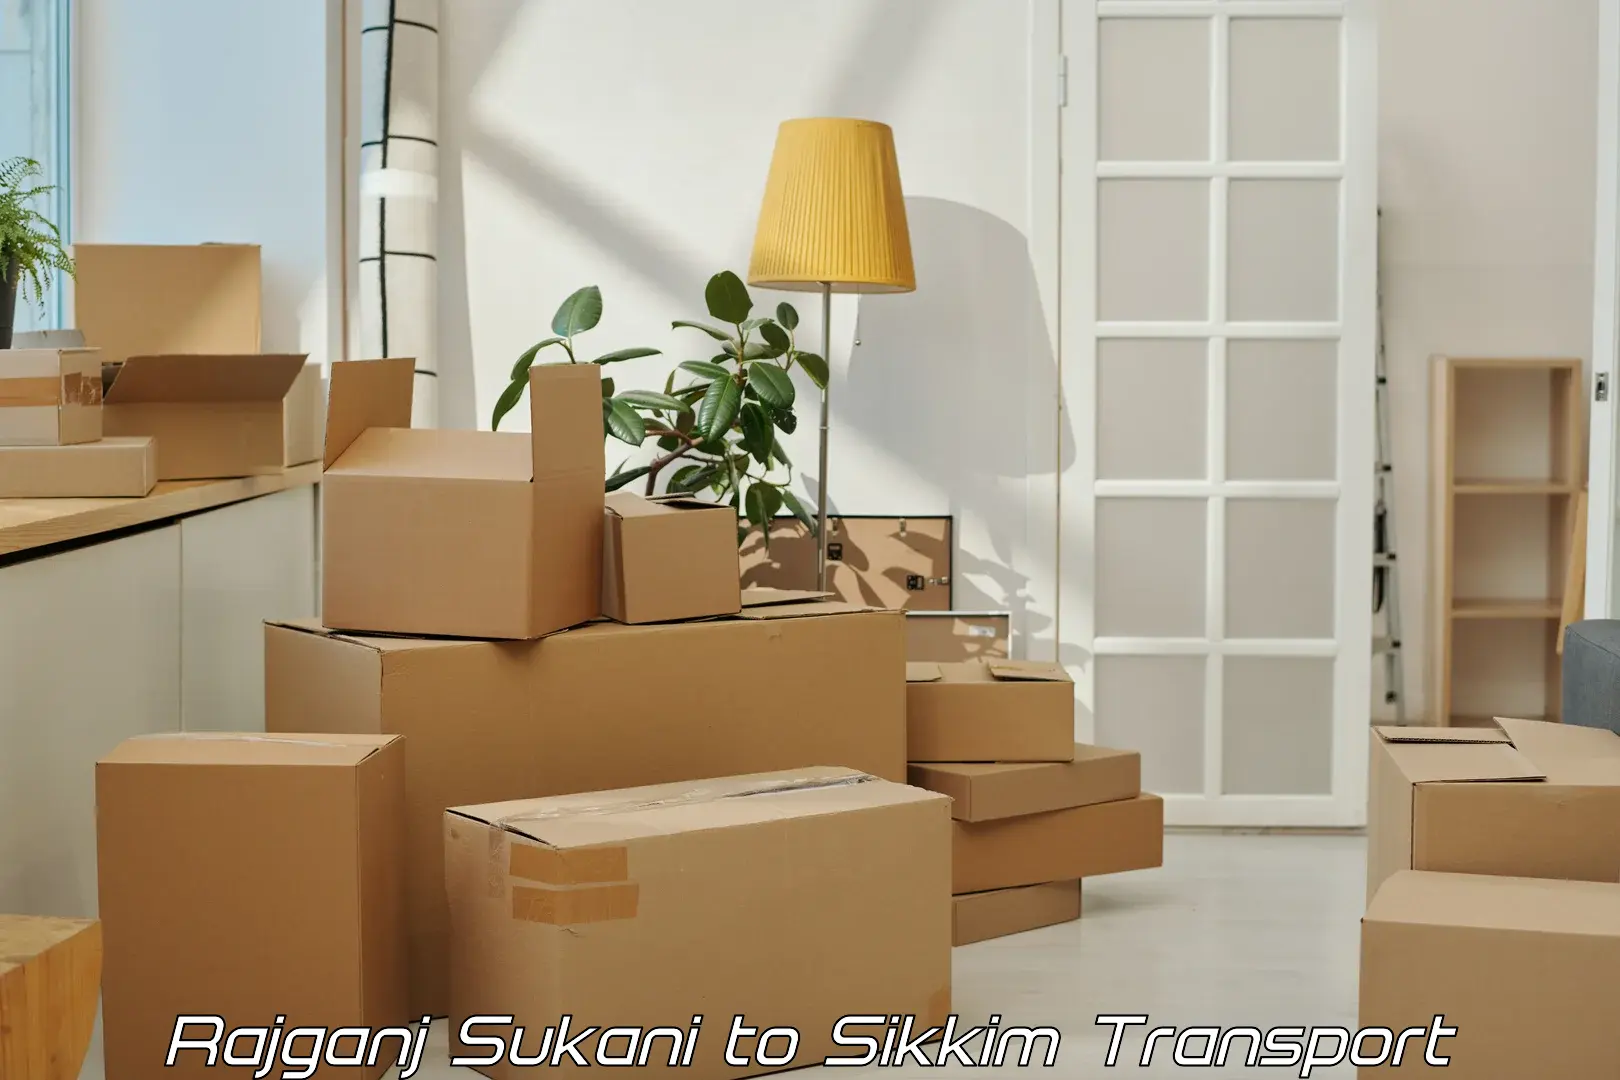 Shipping services Rajganj Sukani to West Sikkim